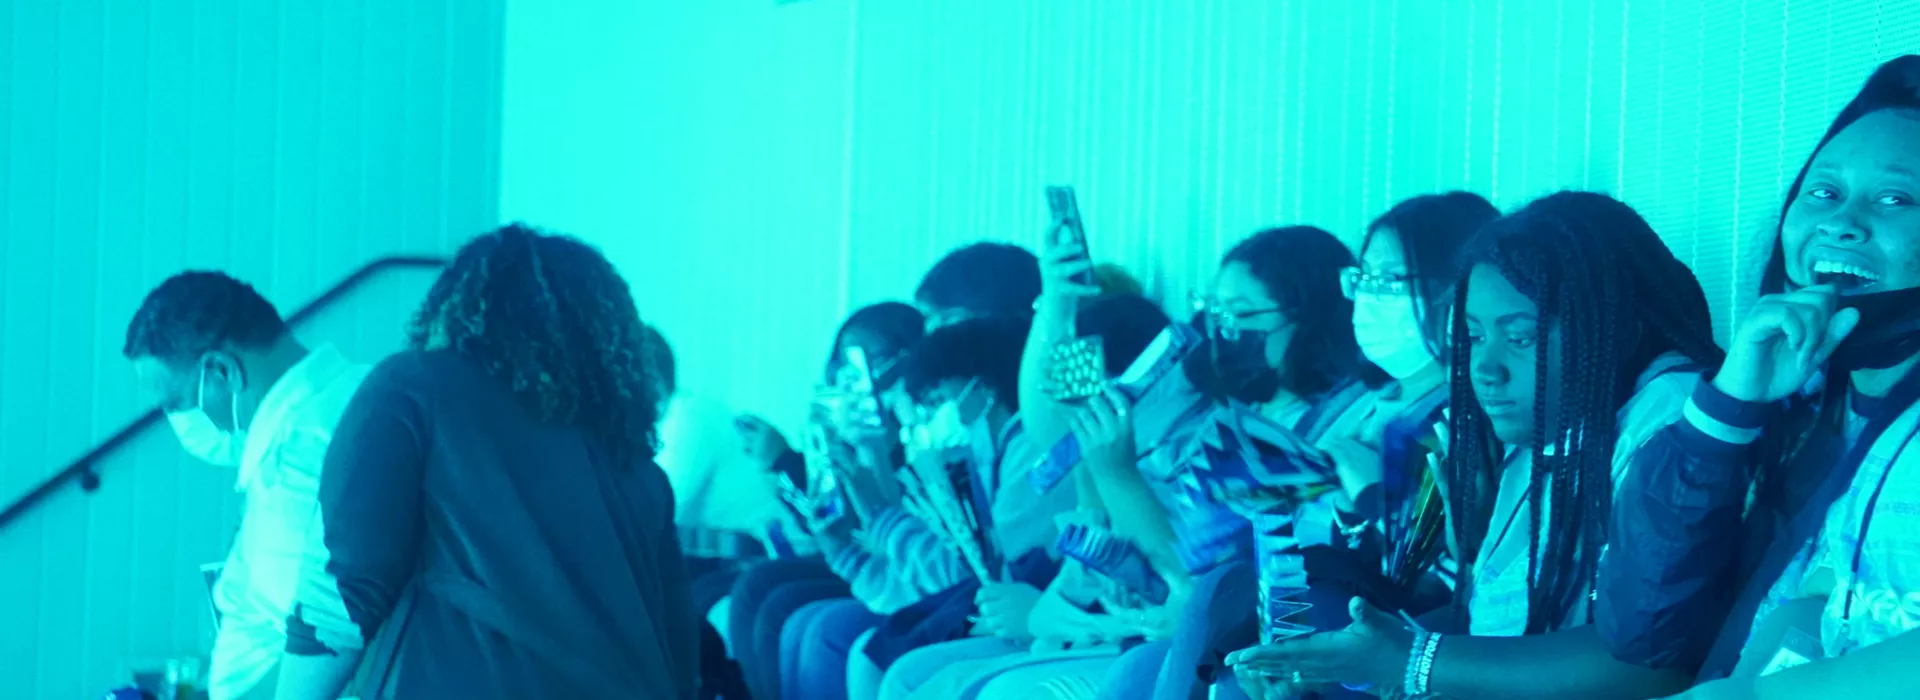 students laughing with aquamarine light